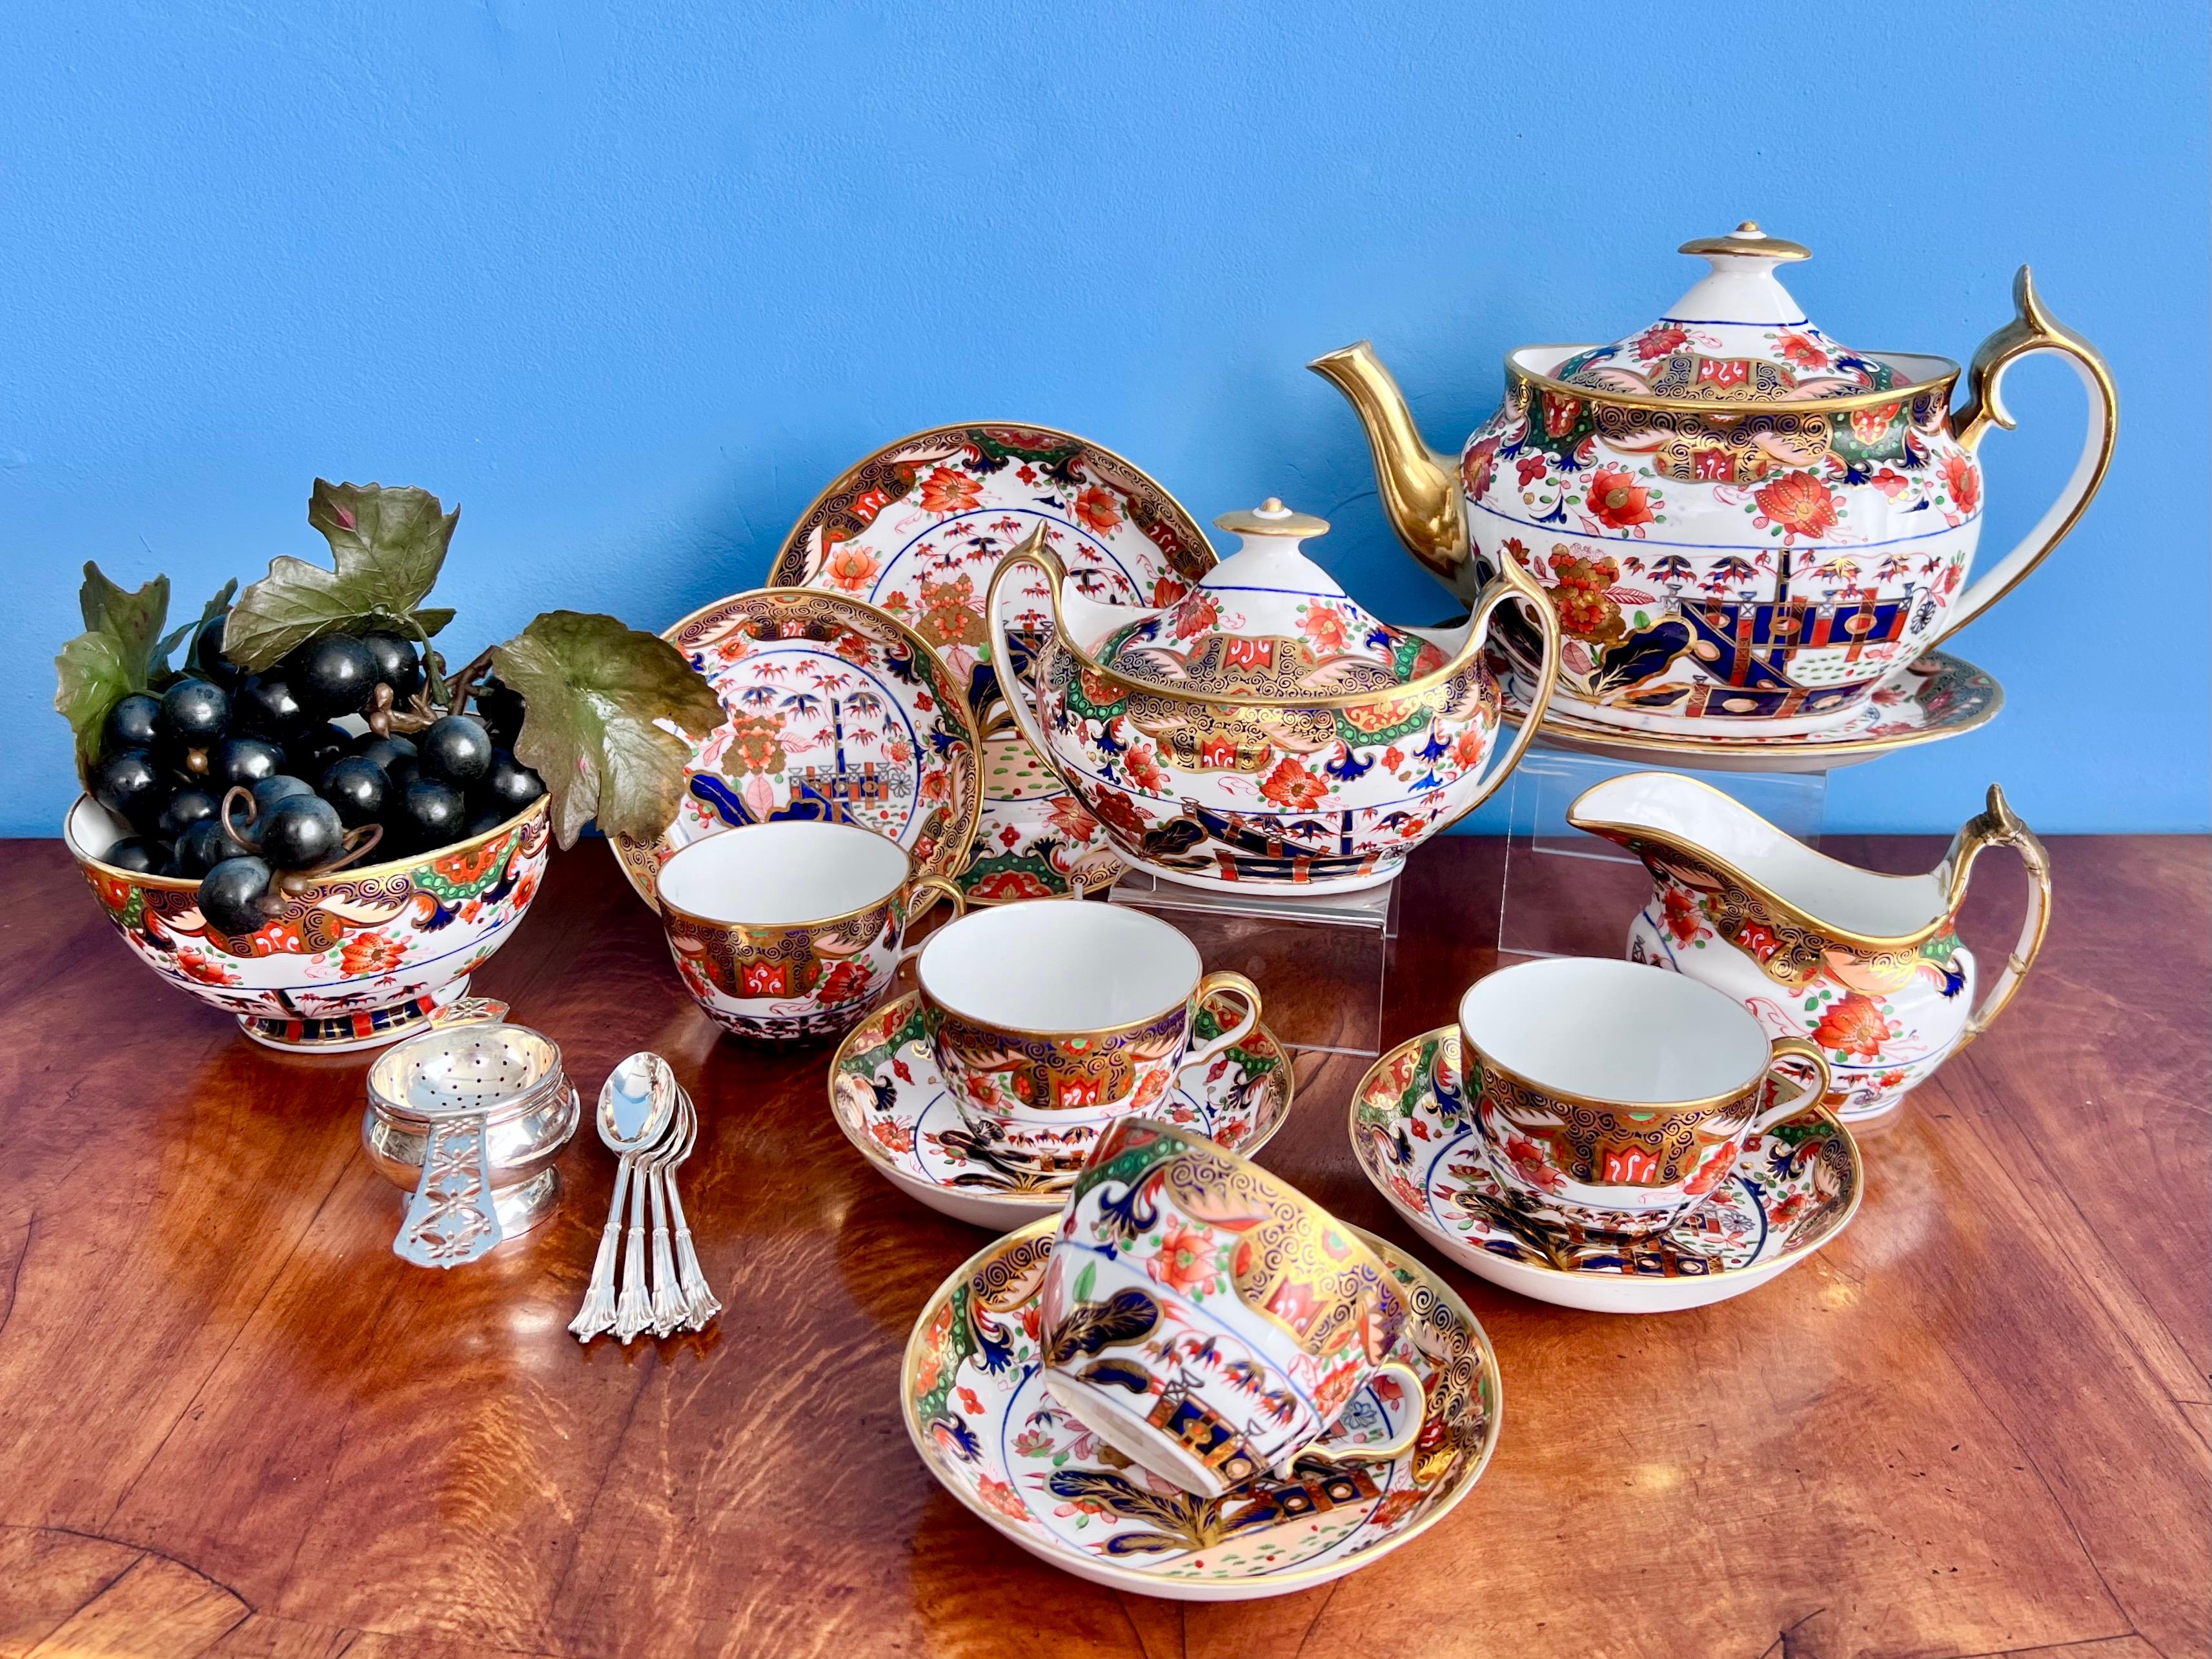 This is a stunning tea service made by Spode in about 1810, consisting of a large teapot with cover, a milk jug, a sucrier with cover, a slop bowl, a saucer dish and 4 teacups with saucers. The set is decorated with the famous Imari Tobacco Leaf